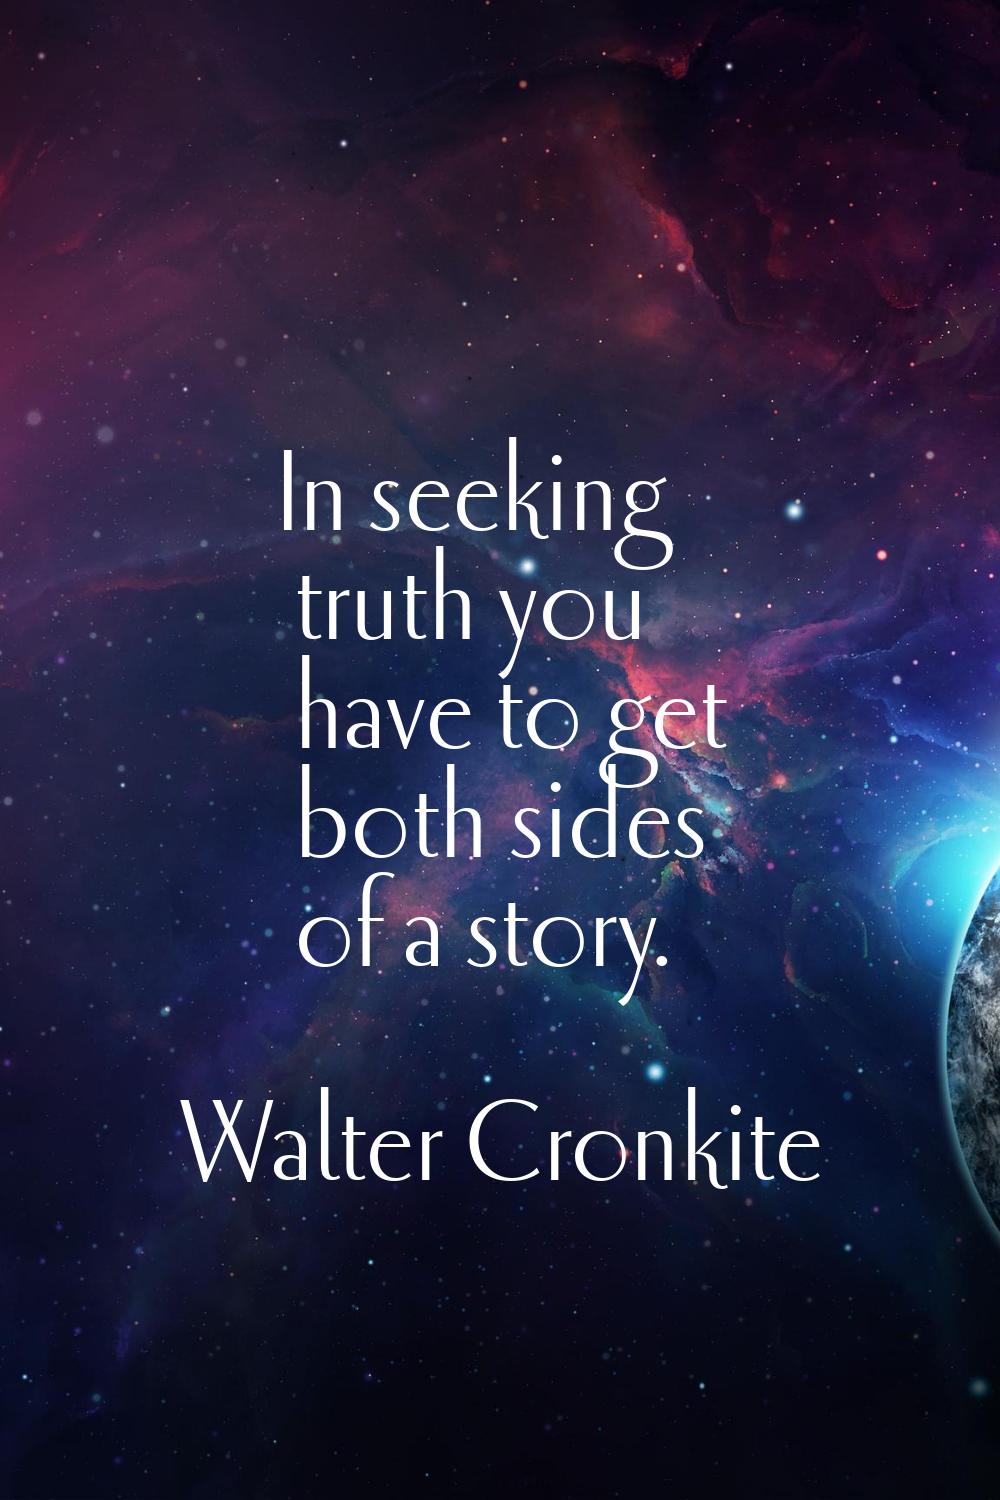 In seeking truth you have to get both sides of a story.